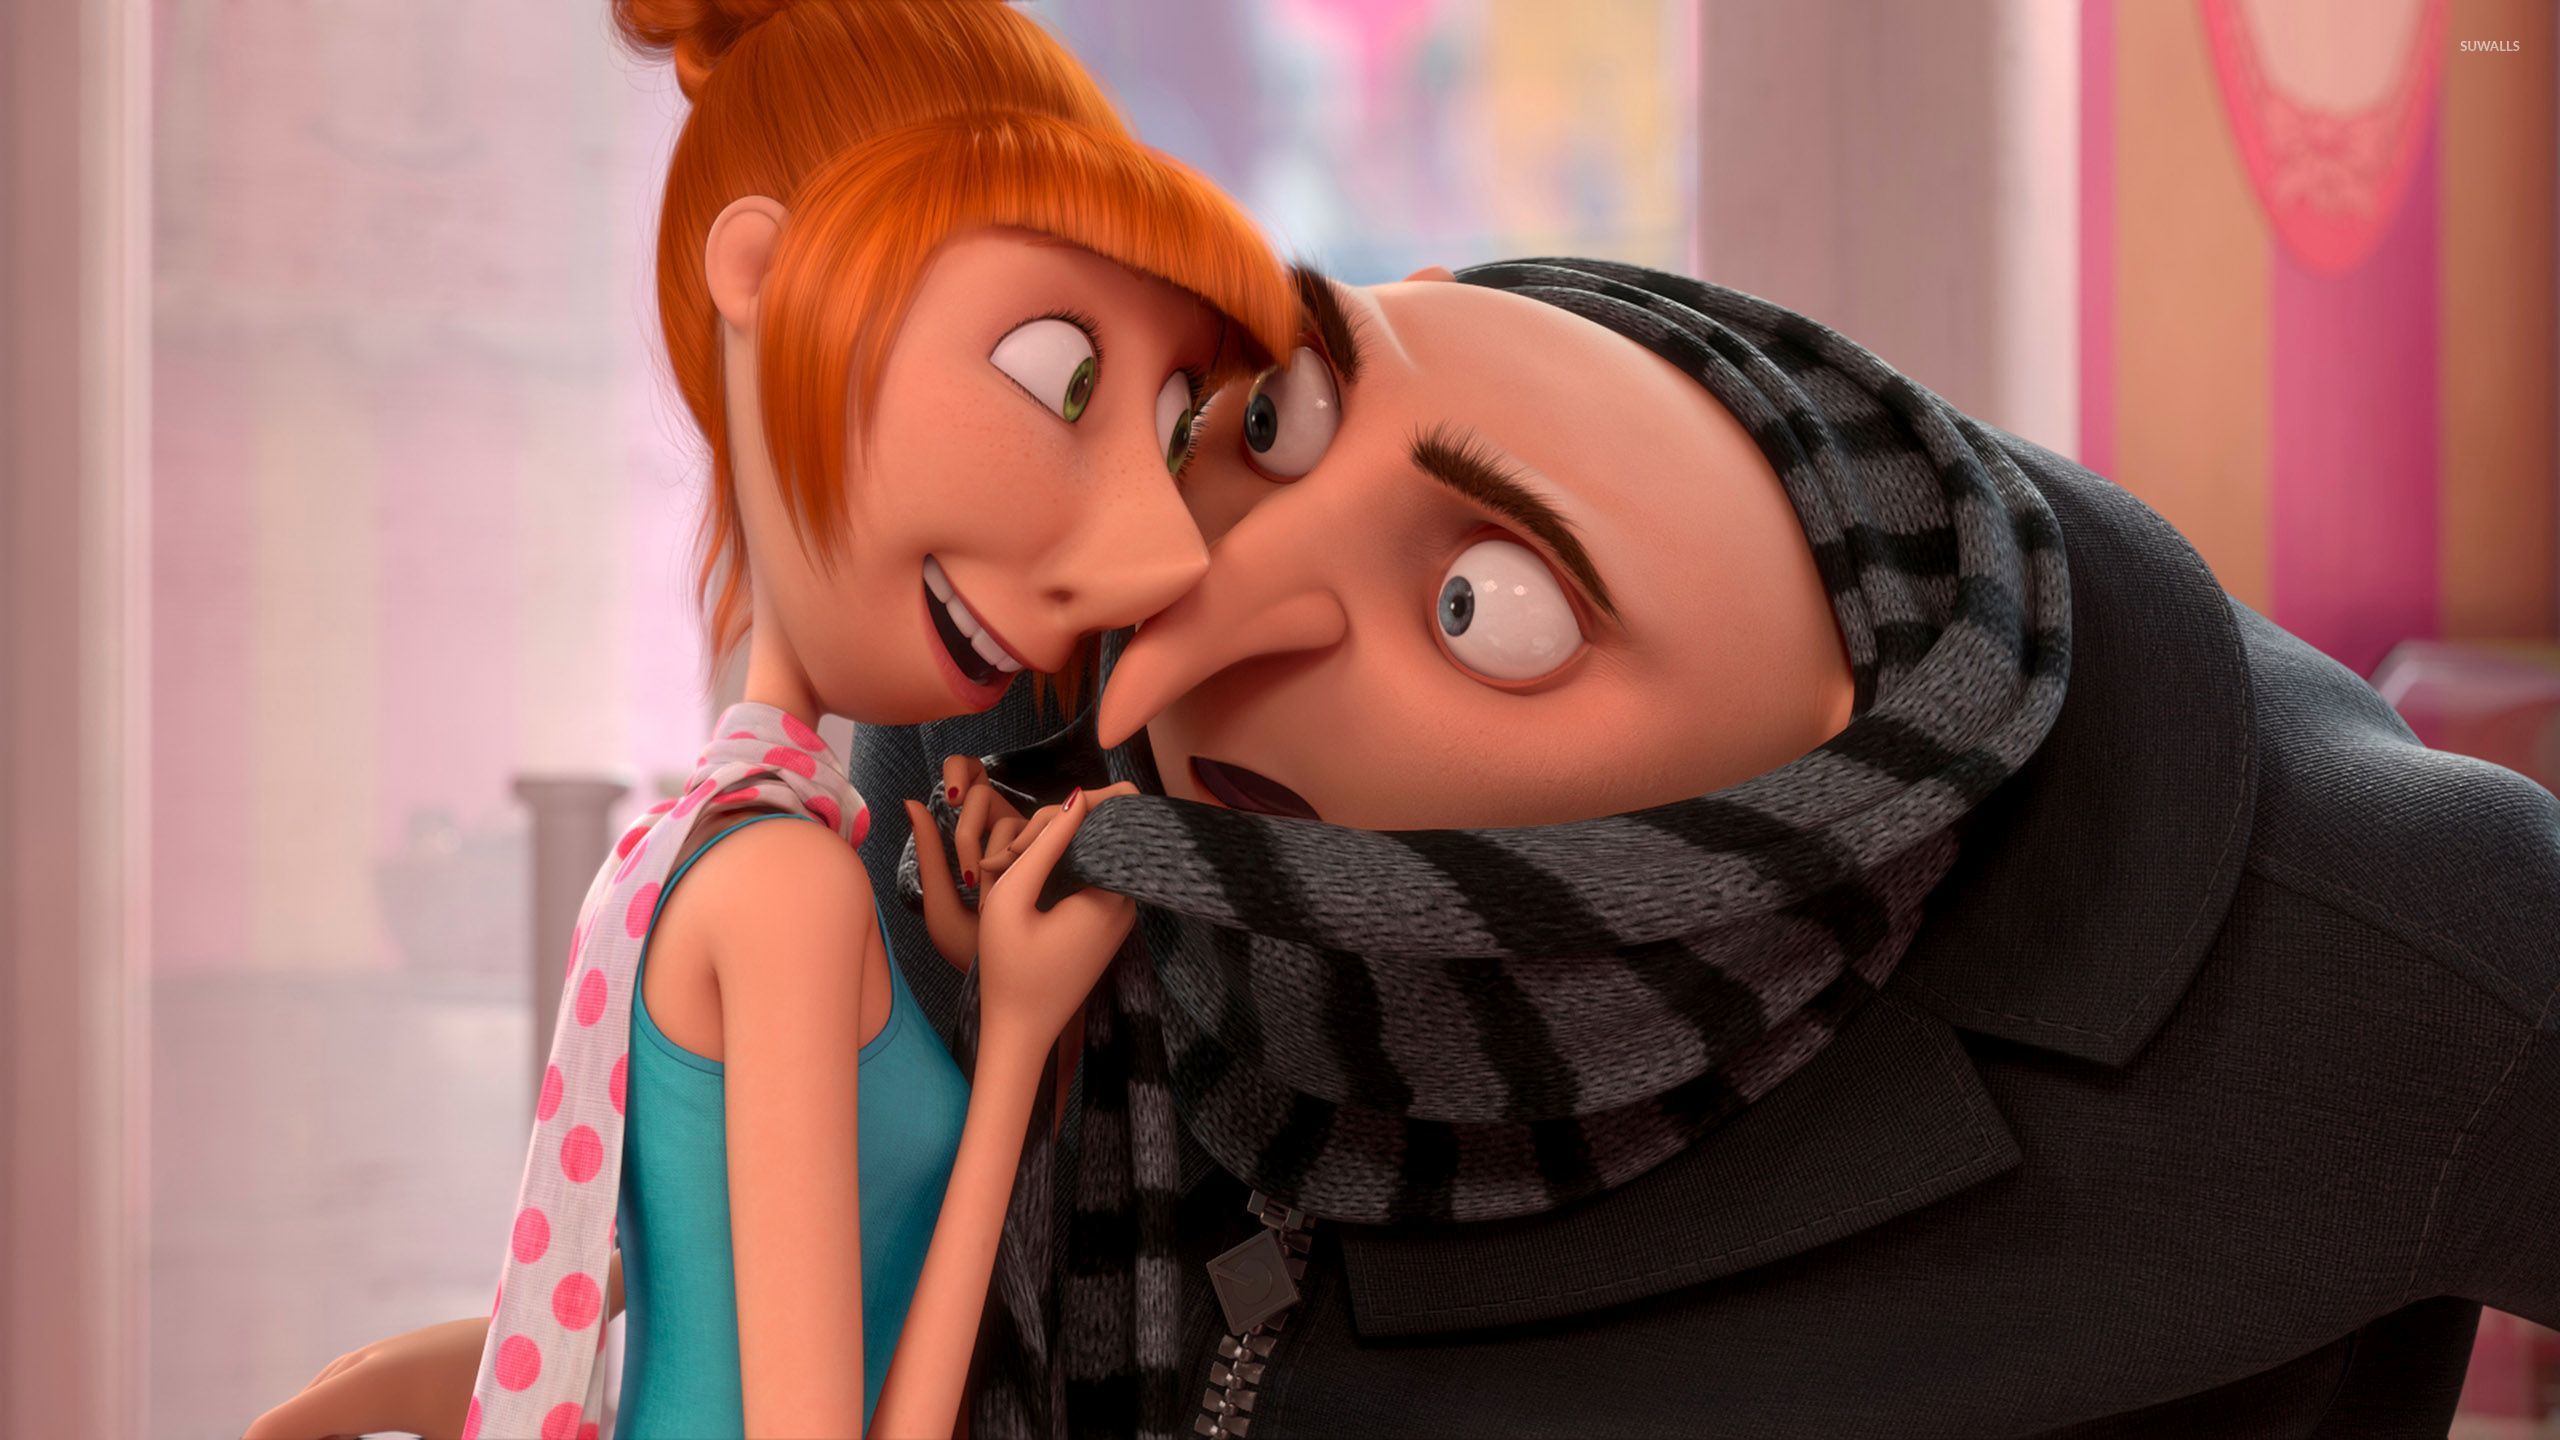 Gru and Lucy Me 2 wallpaper wallpaper